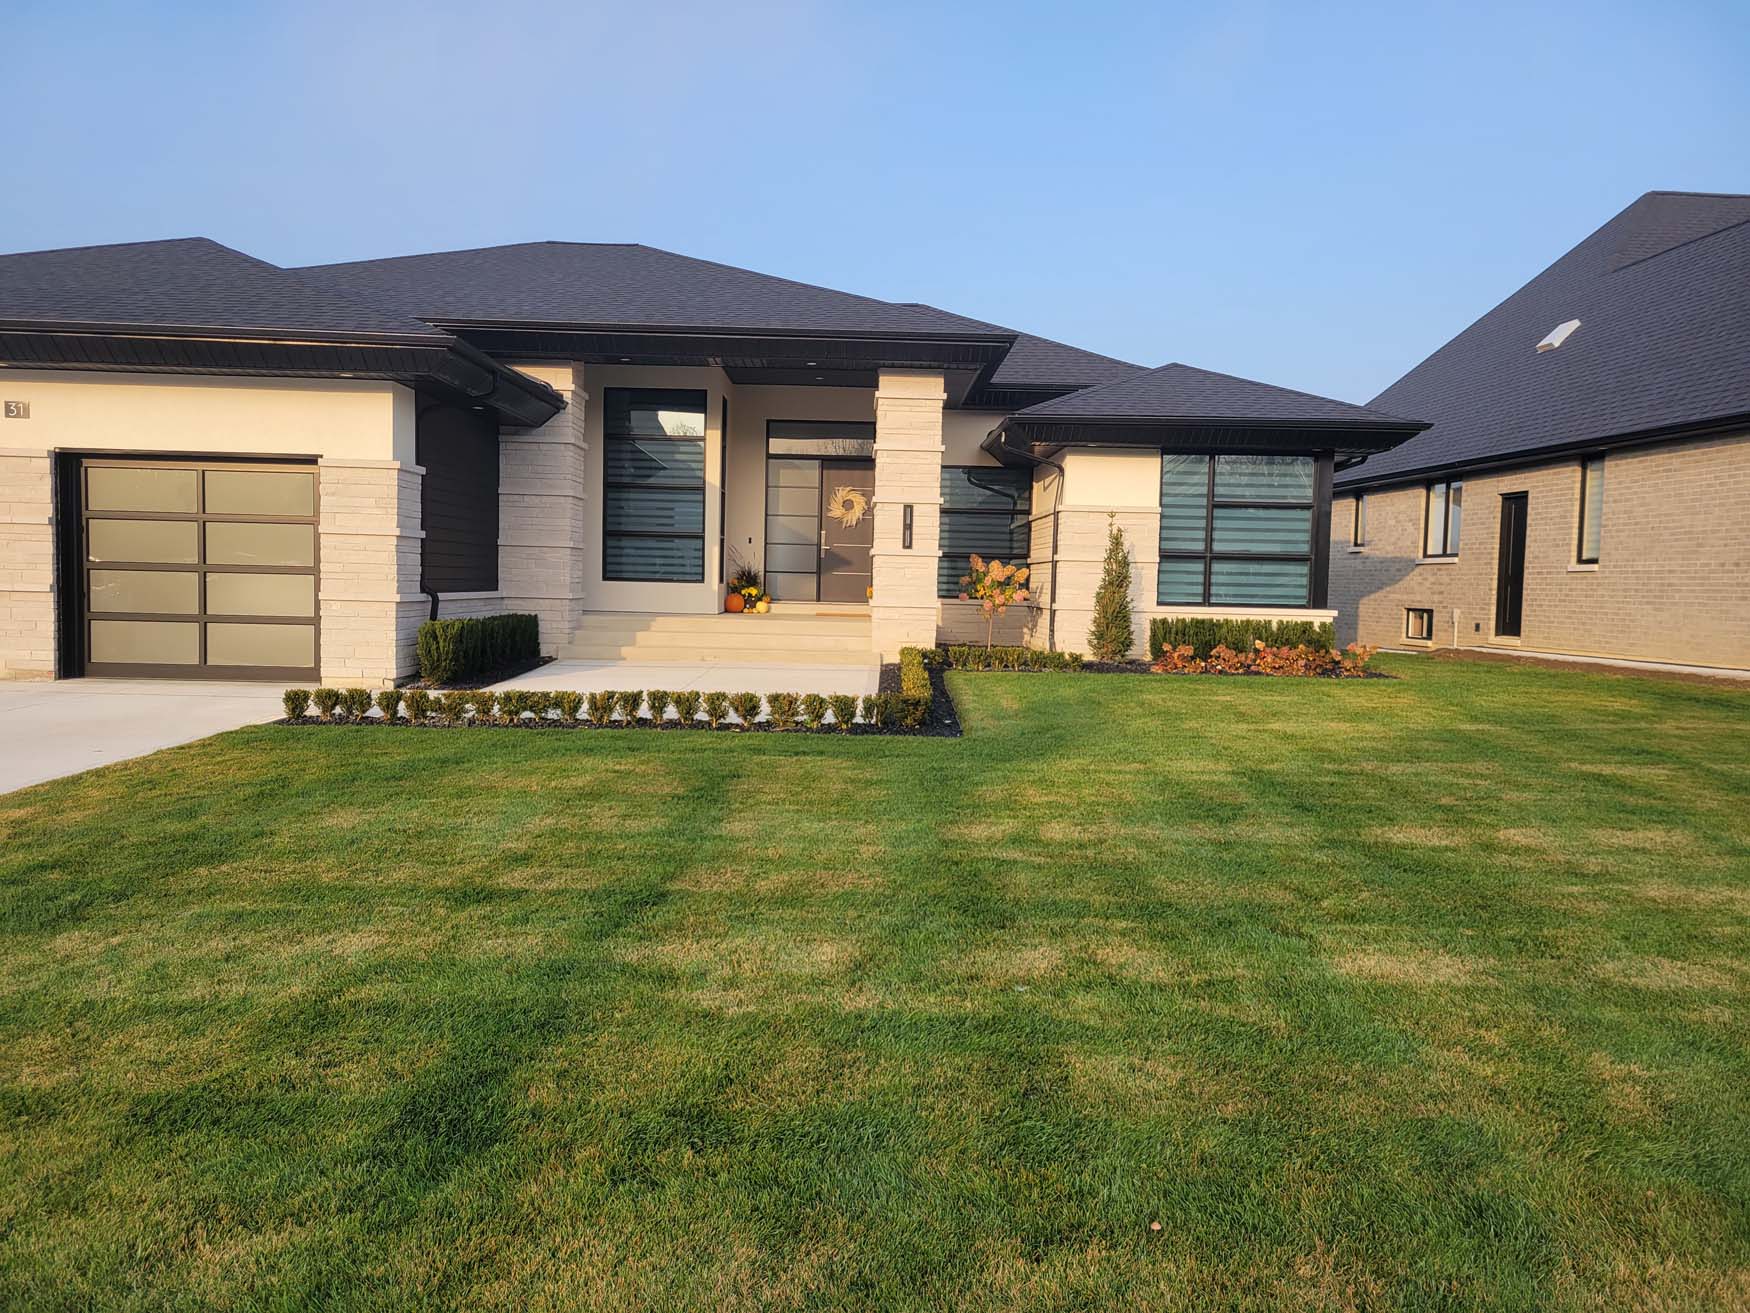 Residential Landscape for your lawn care in Leamington